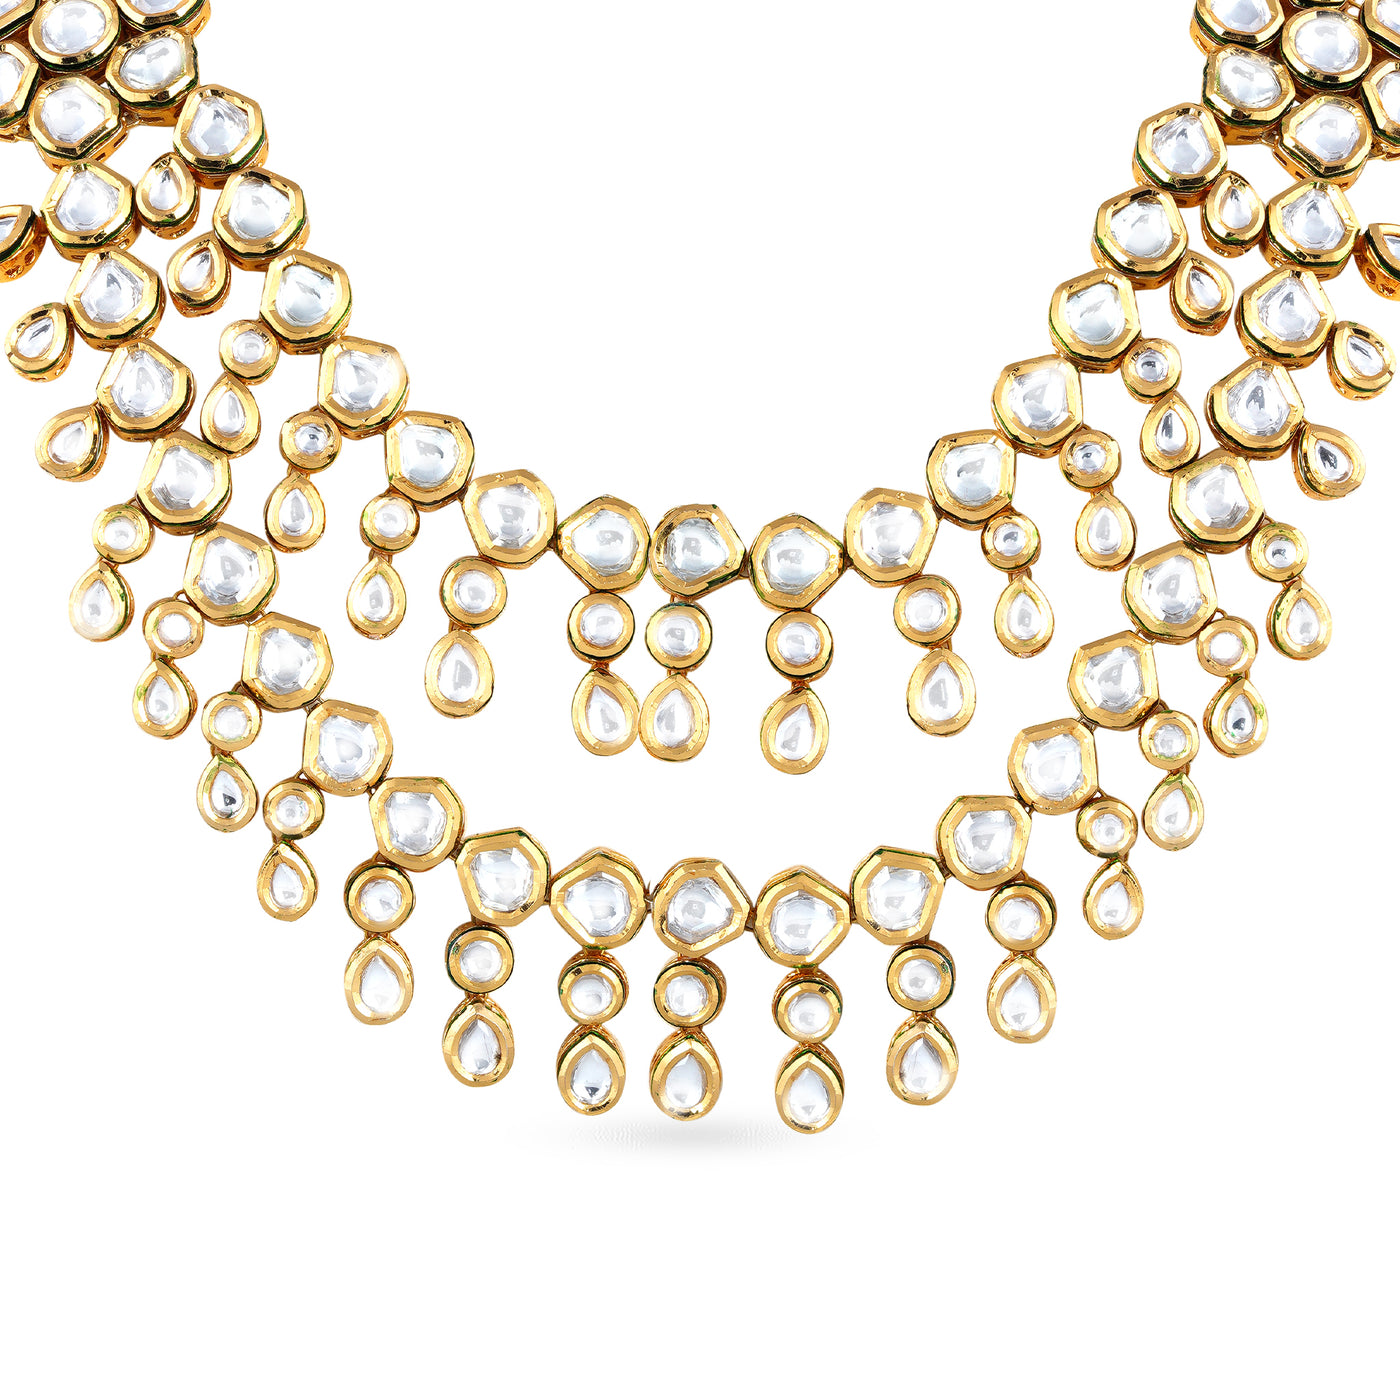 Gold plated kundan necklace set with matching earrings.